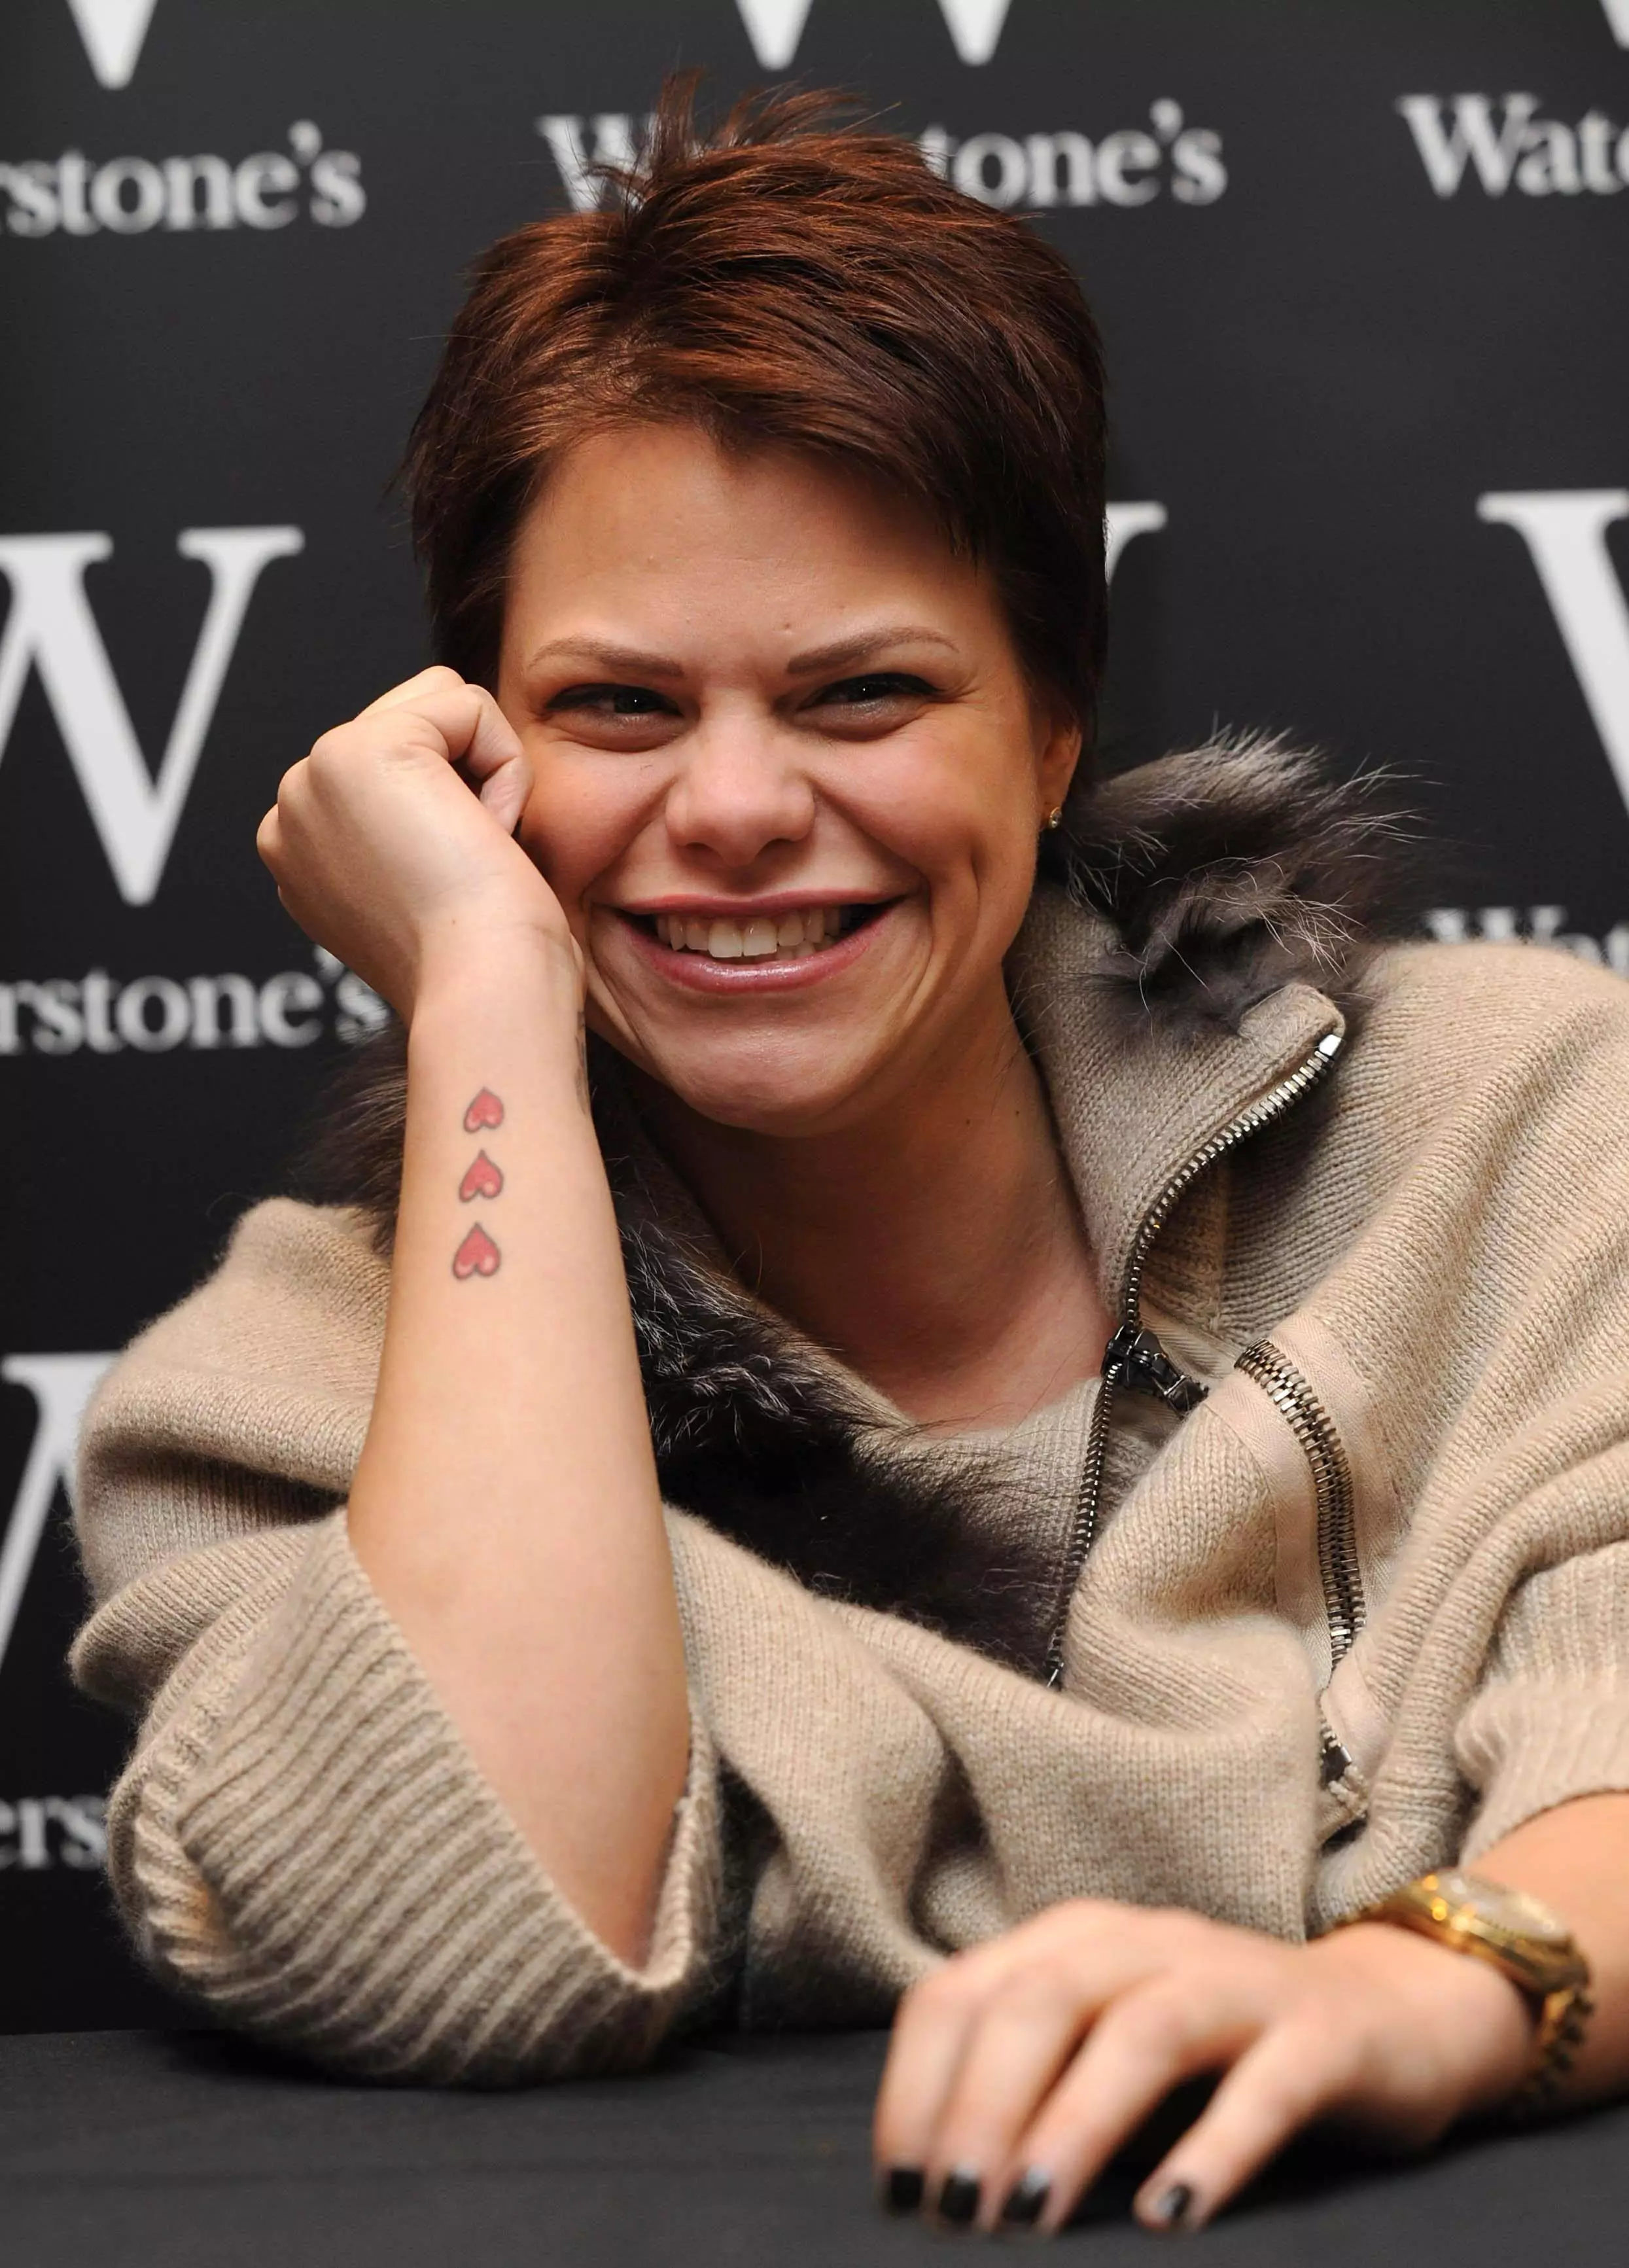 Reality star Jade Goody died of cervical cancer at the age of 27.